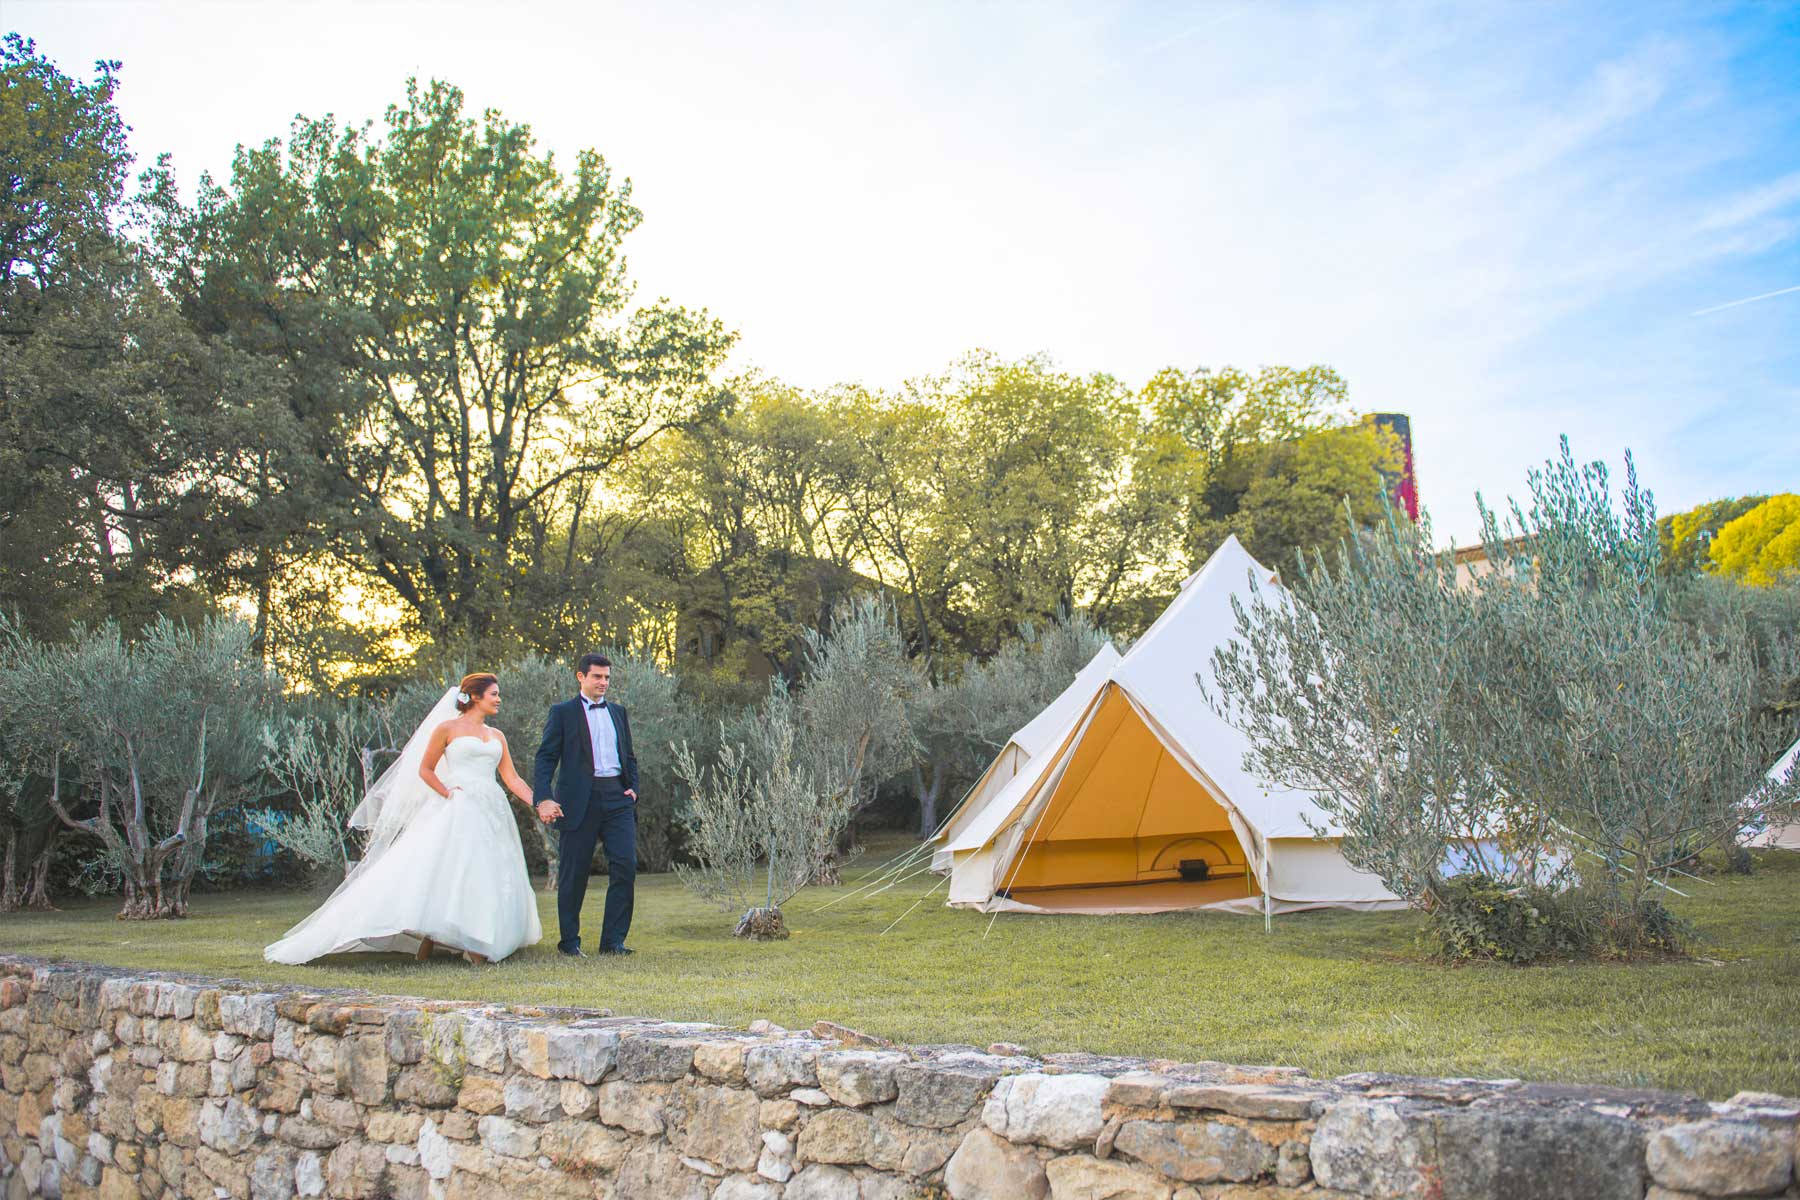 location tente mariage camping chic